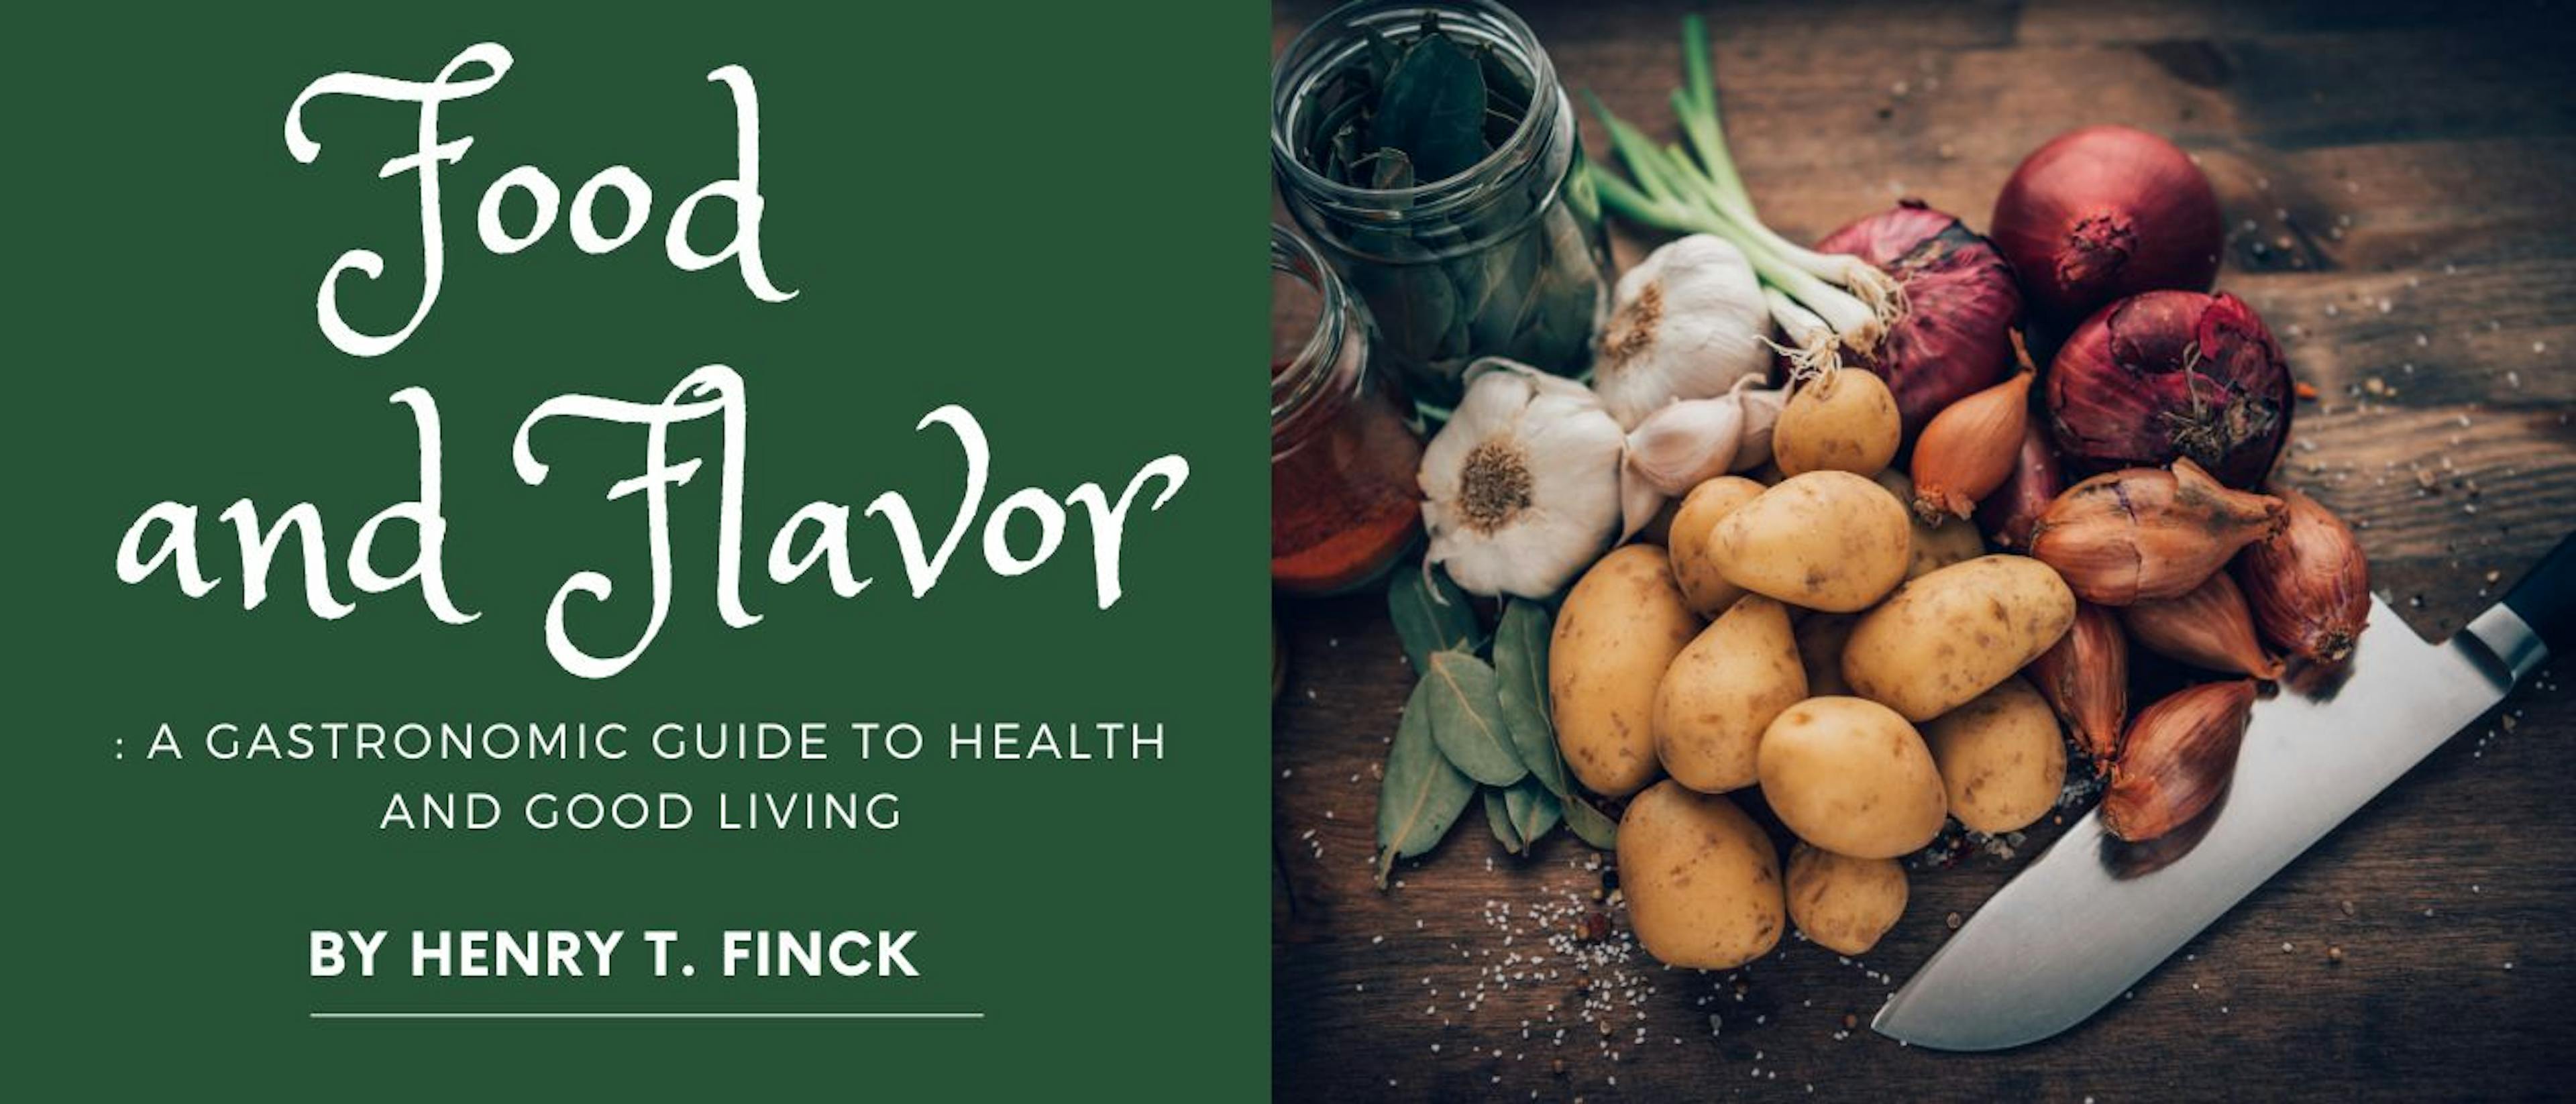 featured image - Food and Flavor: A Gastronomic Guide to Health and Good Living: Chapter X - BRITISH SPECIALTIES